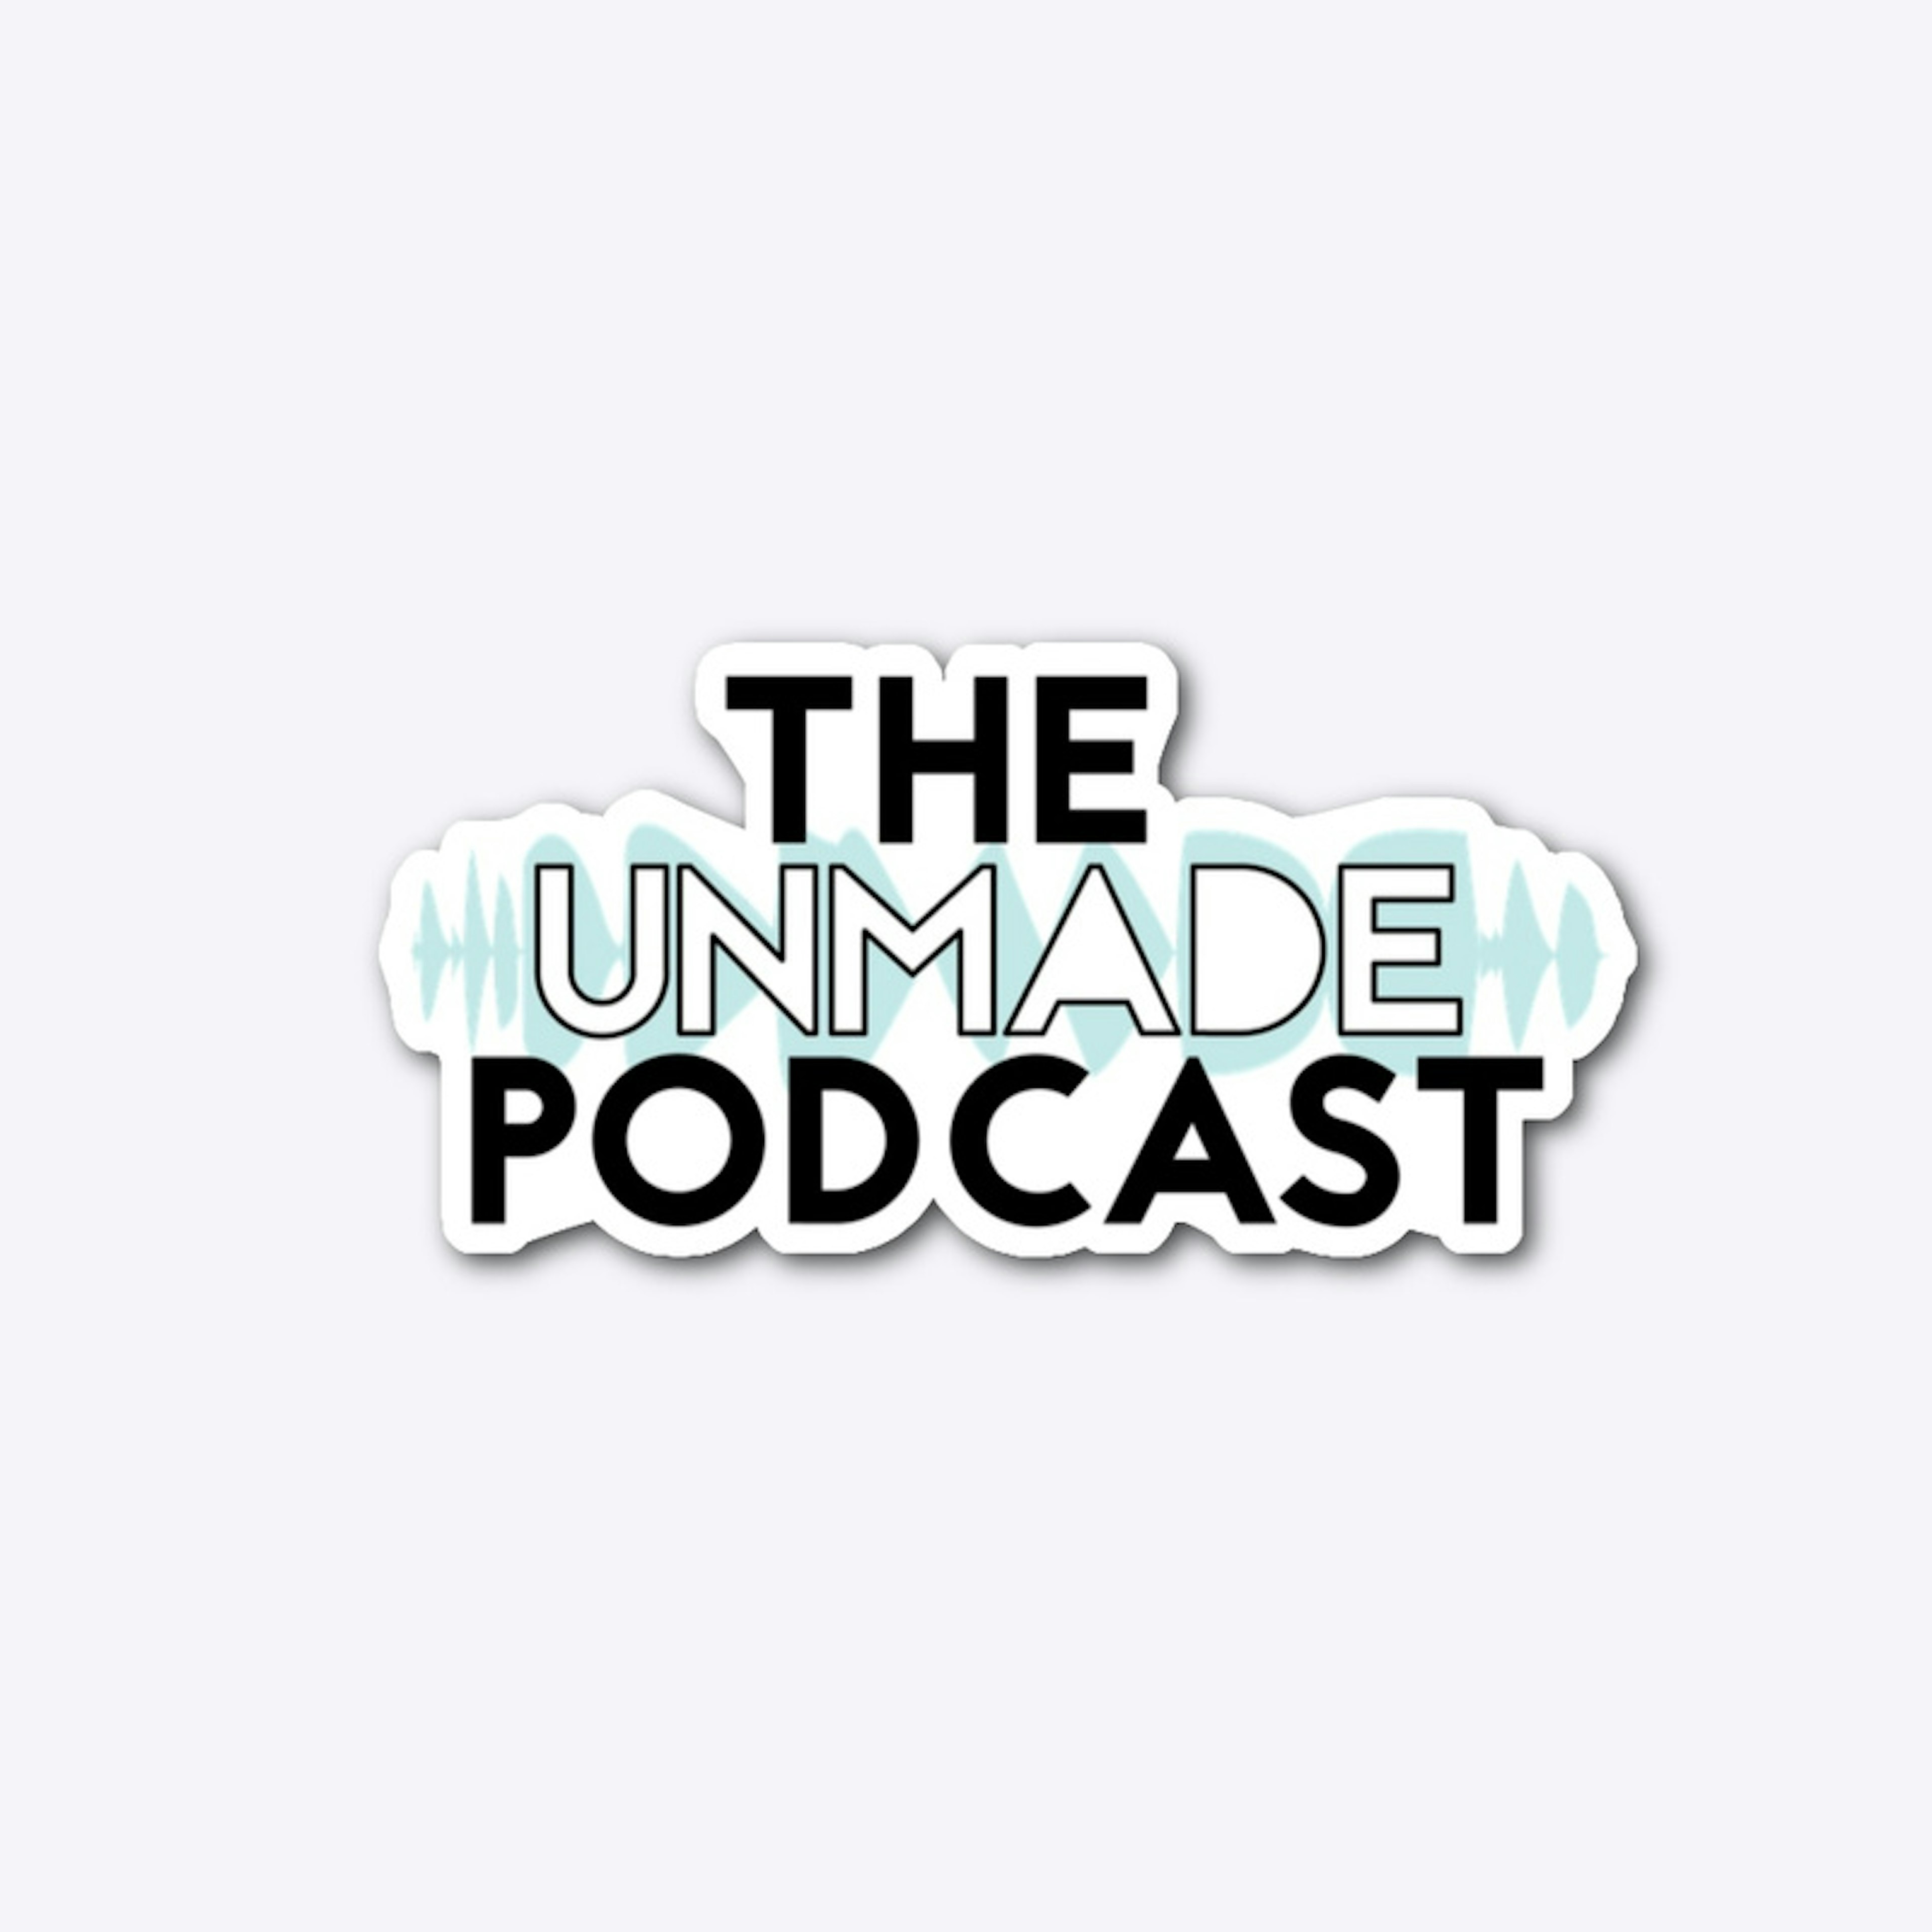 The Unmade Podcast